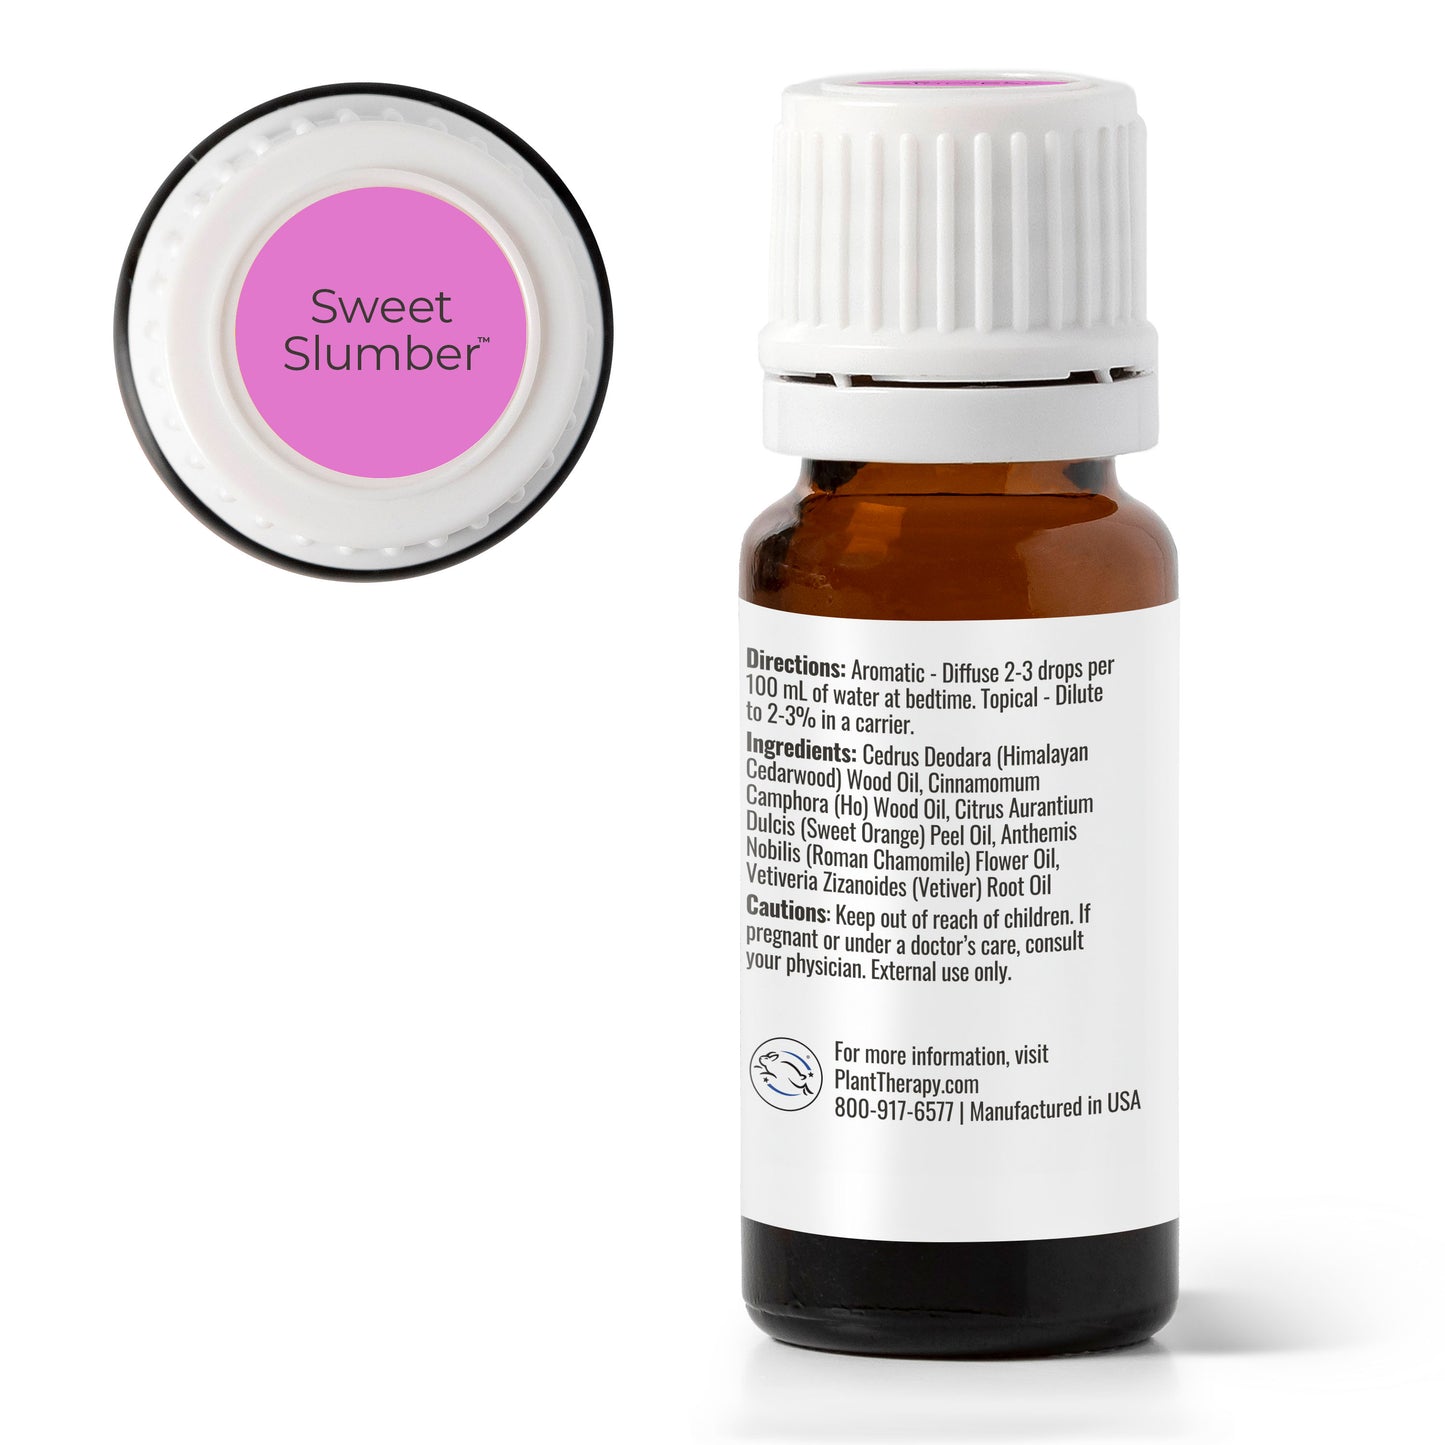 Sweet Slumber KidSafe Essential Oil back label with ingredients and direction panels